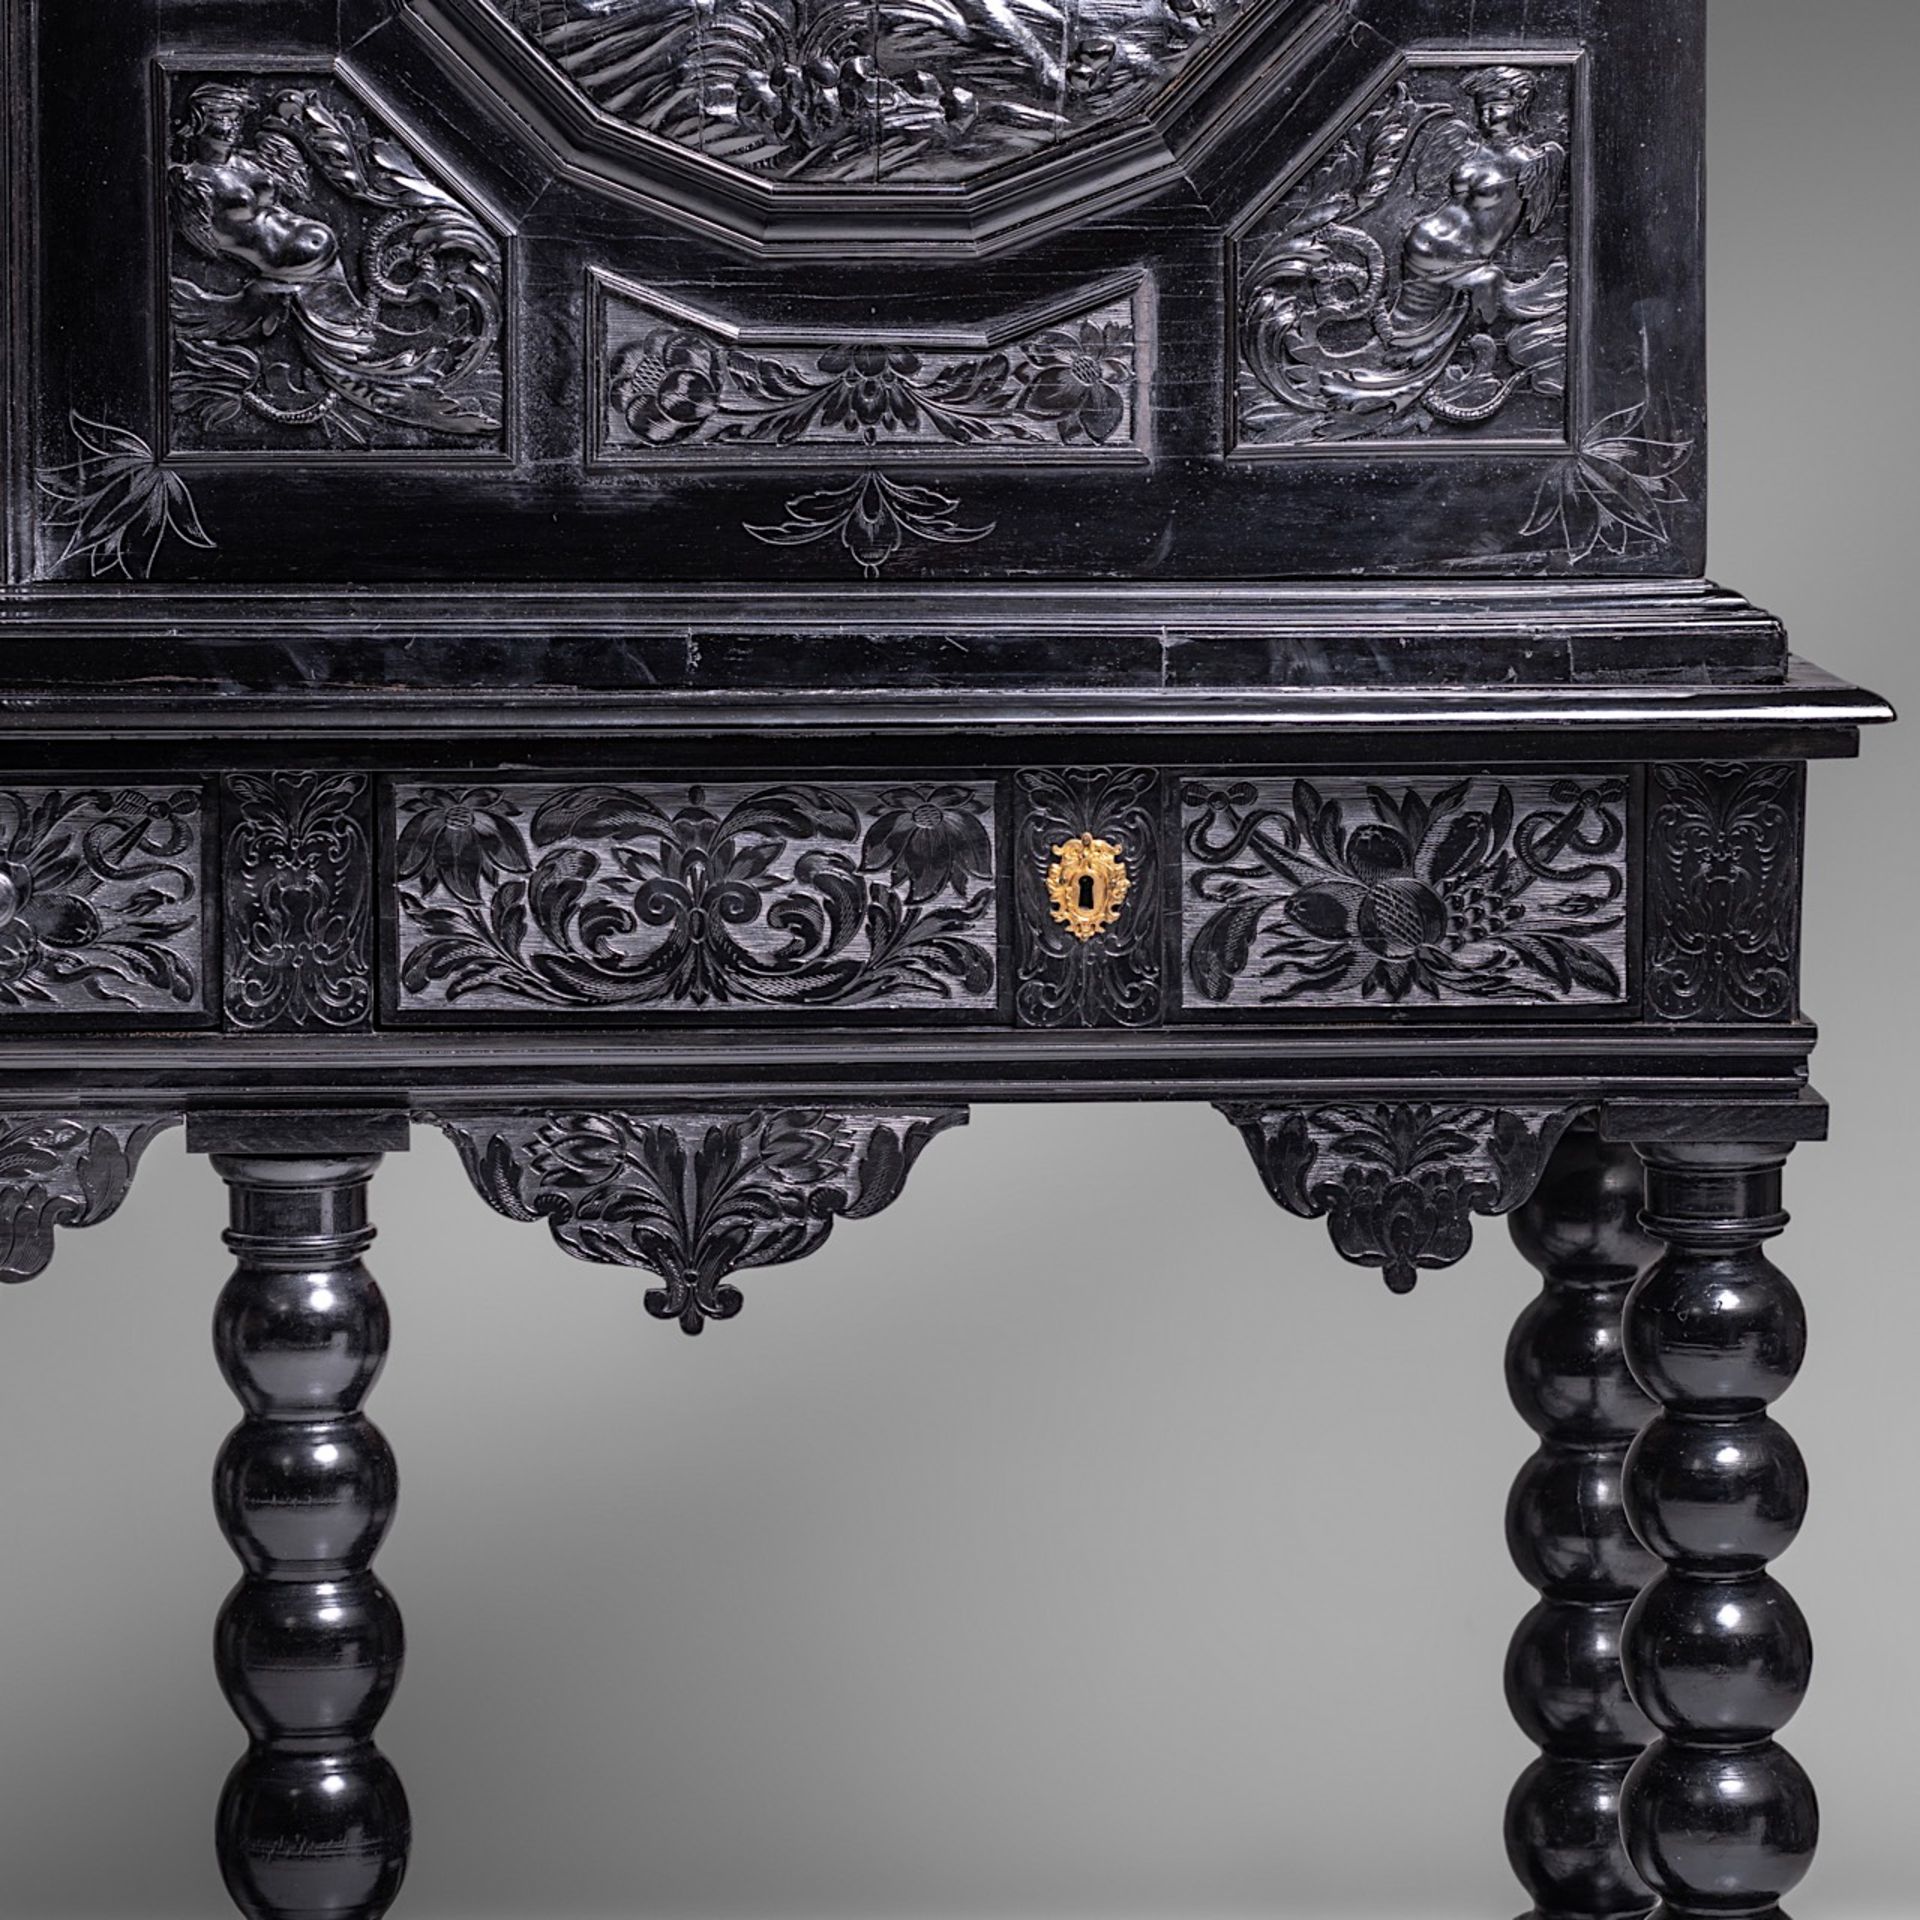 PREMIUM LOT - An exceptional 17thC French ebony and ebonised cabinet-on-stand, H 181,5 - W 163 - D 5 - Bild 13 aus 14